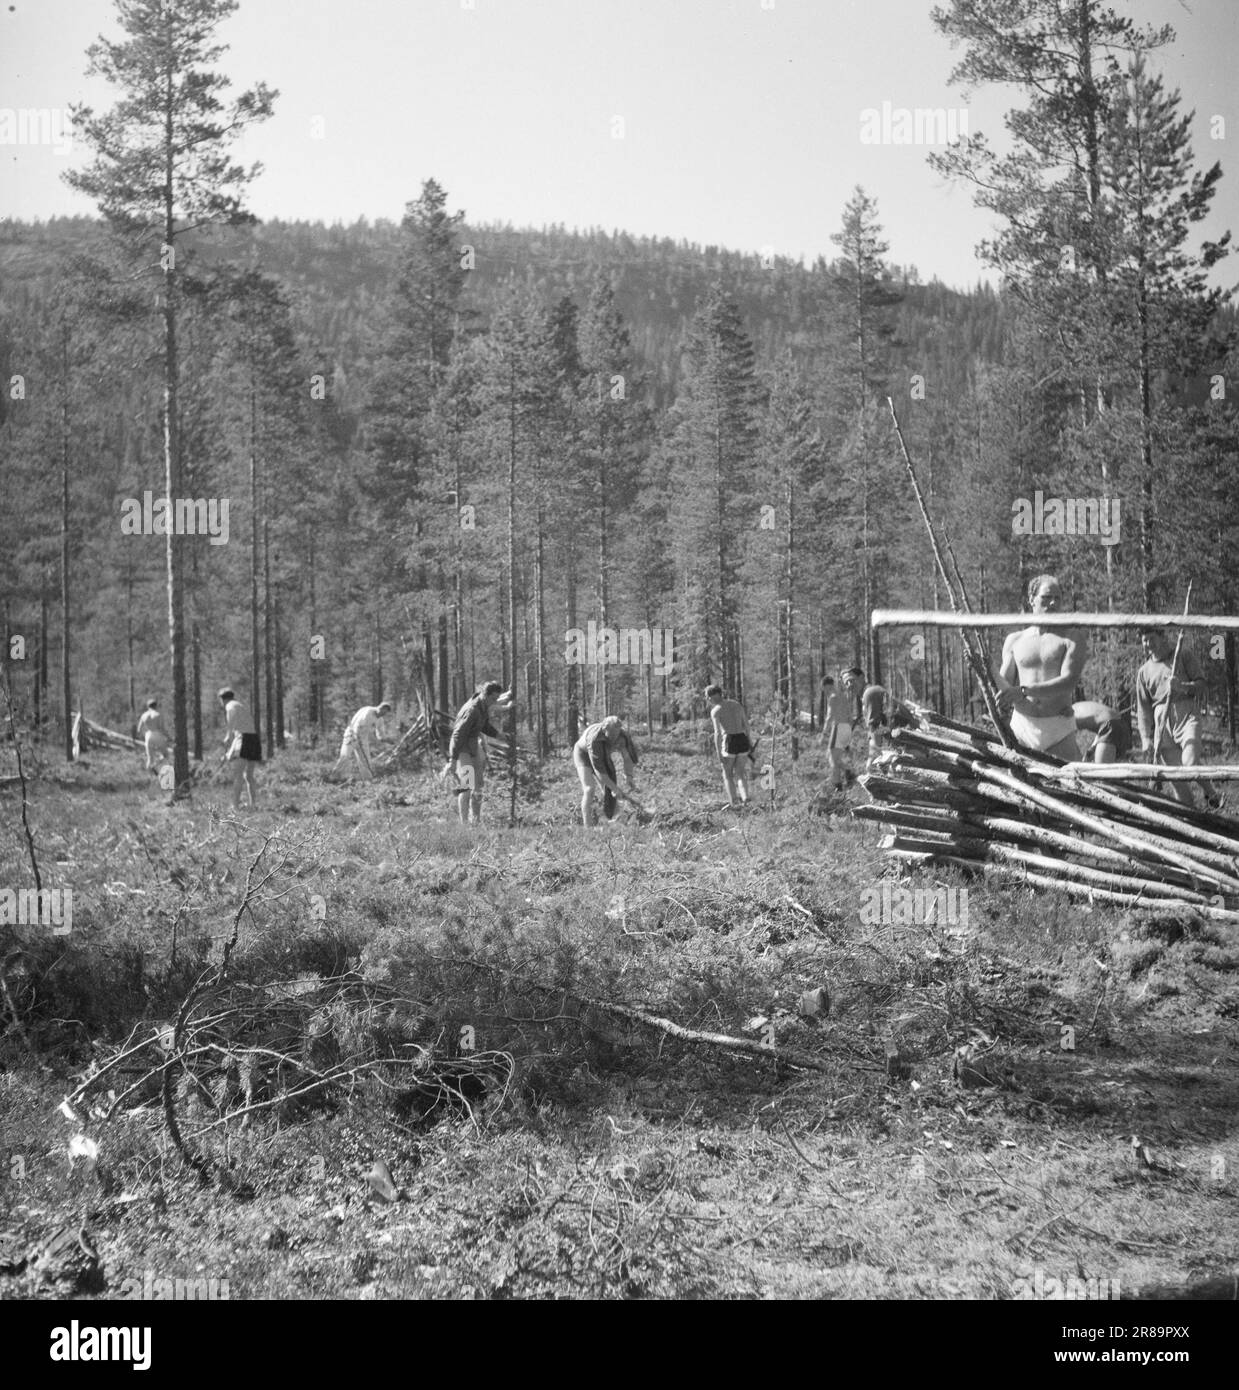 Actual 13-3-1947: The training camp in Eggedal Olympia training in Eggedal  Under the leadership of the Swedish Athletics Federation's national coach, Kaare Meidell Sundal, runners, jumpers and throwers have undergone a short training course with a view to possible participation in the Olympics in London next year.  Strengthening the body during forestry work is an ideal form of exercise. Here, work and training go hand in hand. It is much better than the rigid and stereotypical line gymnastics. - Some of the throwers are in the process of chopping and clearing while others are stacking rice. Stock Photo